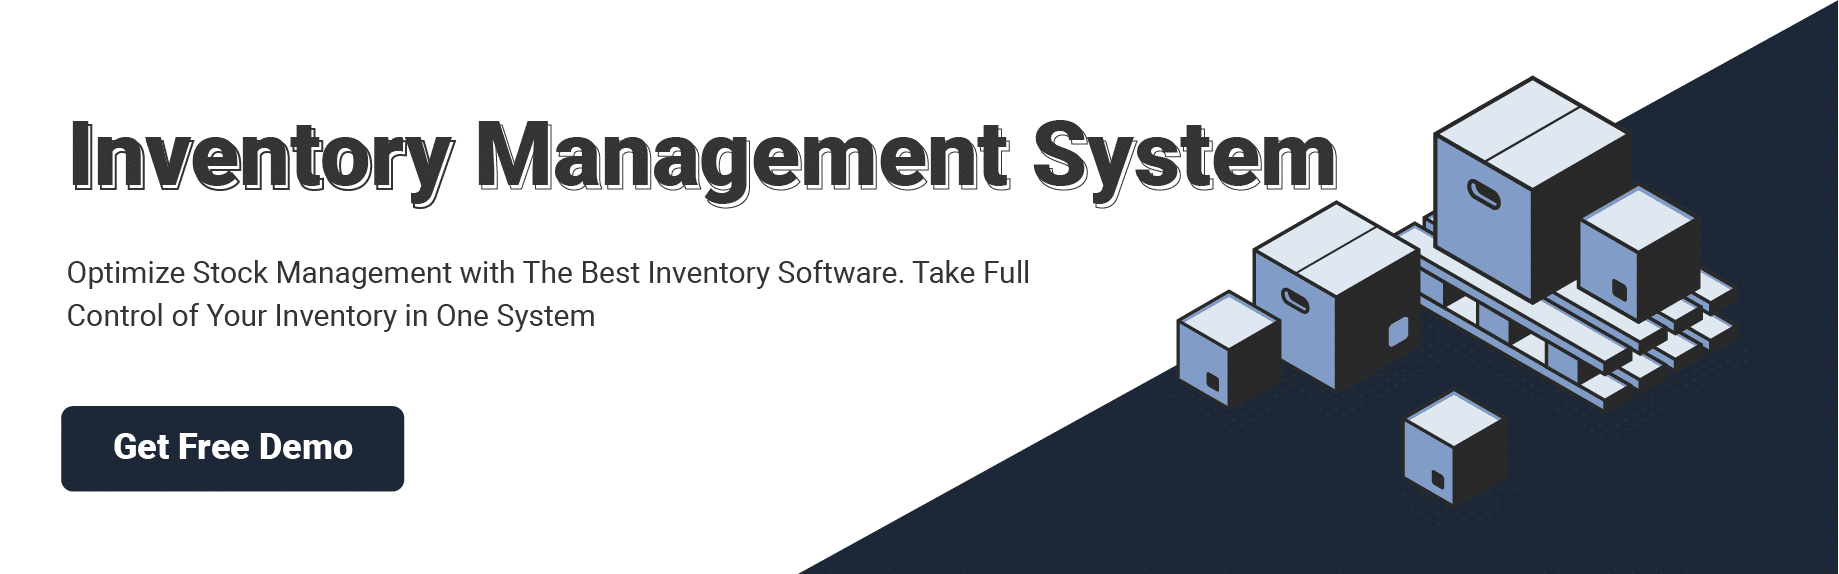 perpetual inventory system